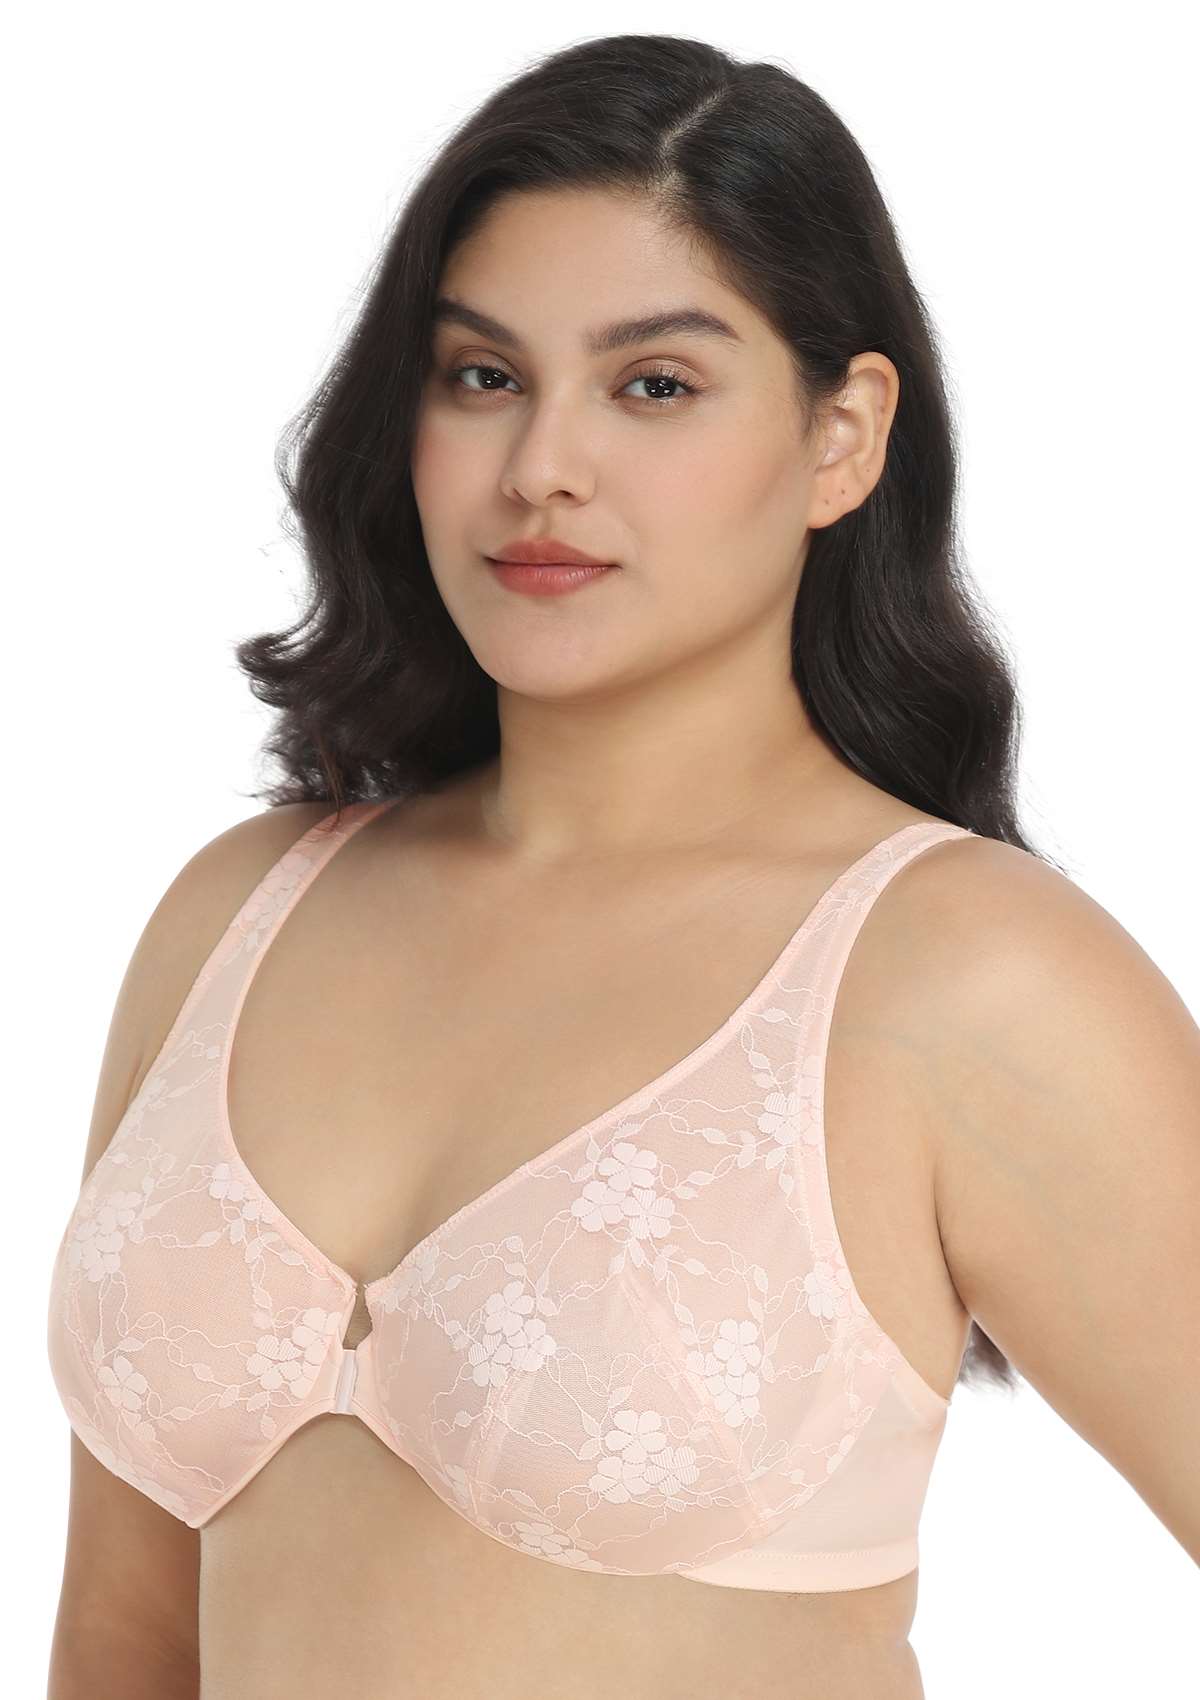 HSIA Spring Romance Front-Close Floral Lace Unlined Full Coverage Bra - White / 42 / DDD/F